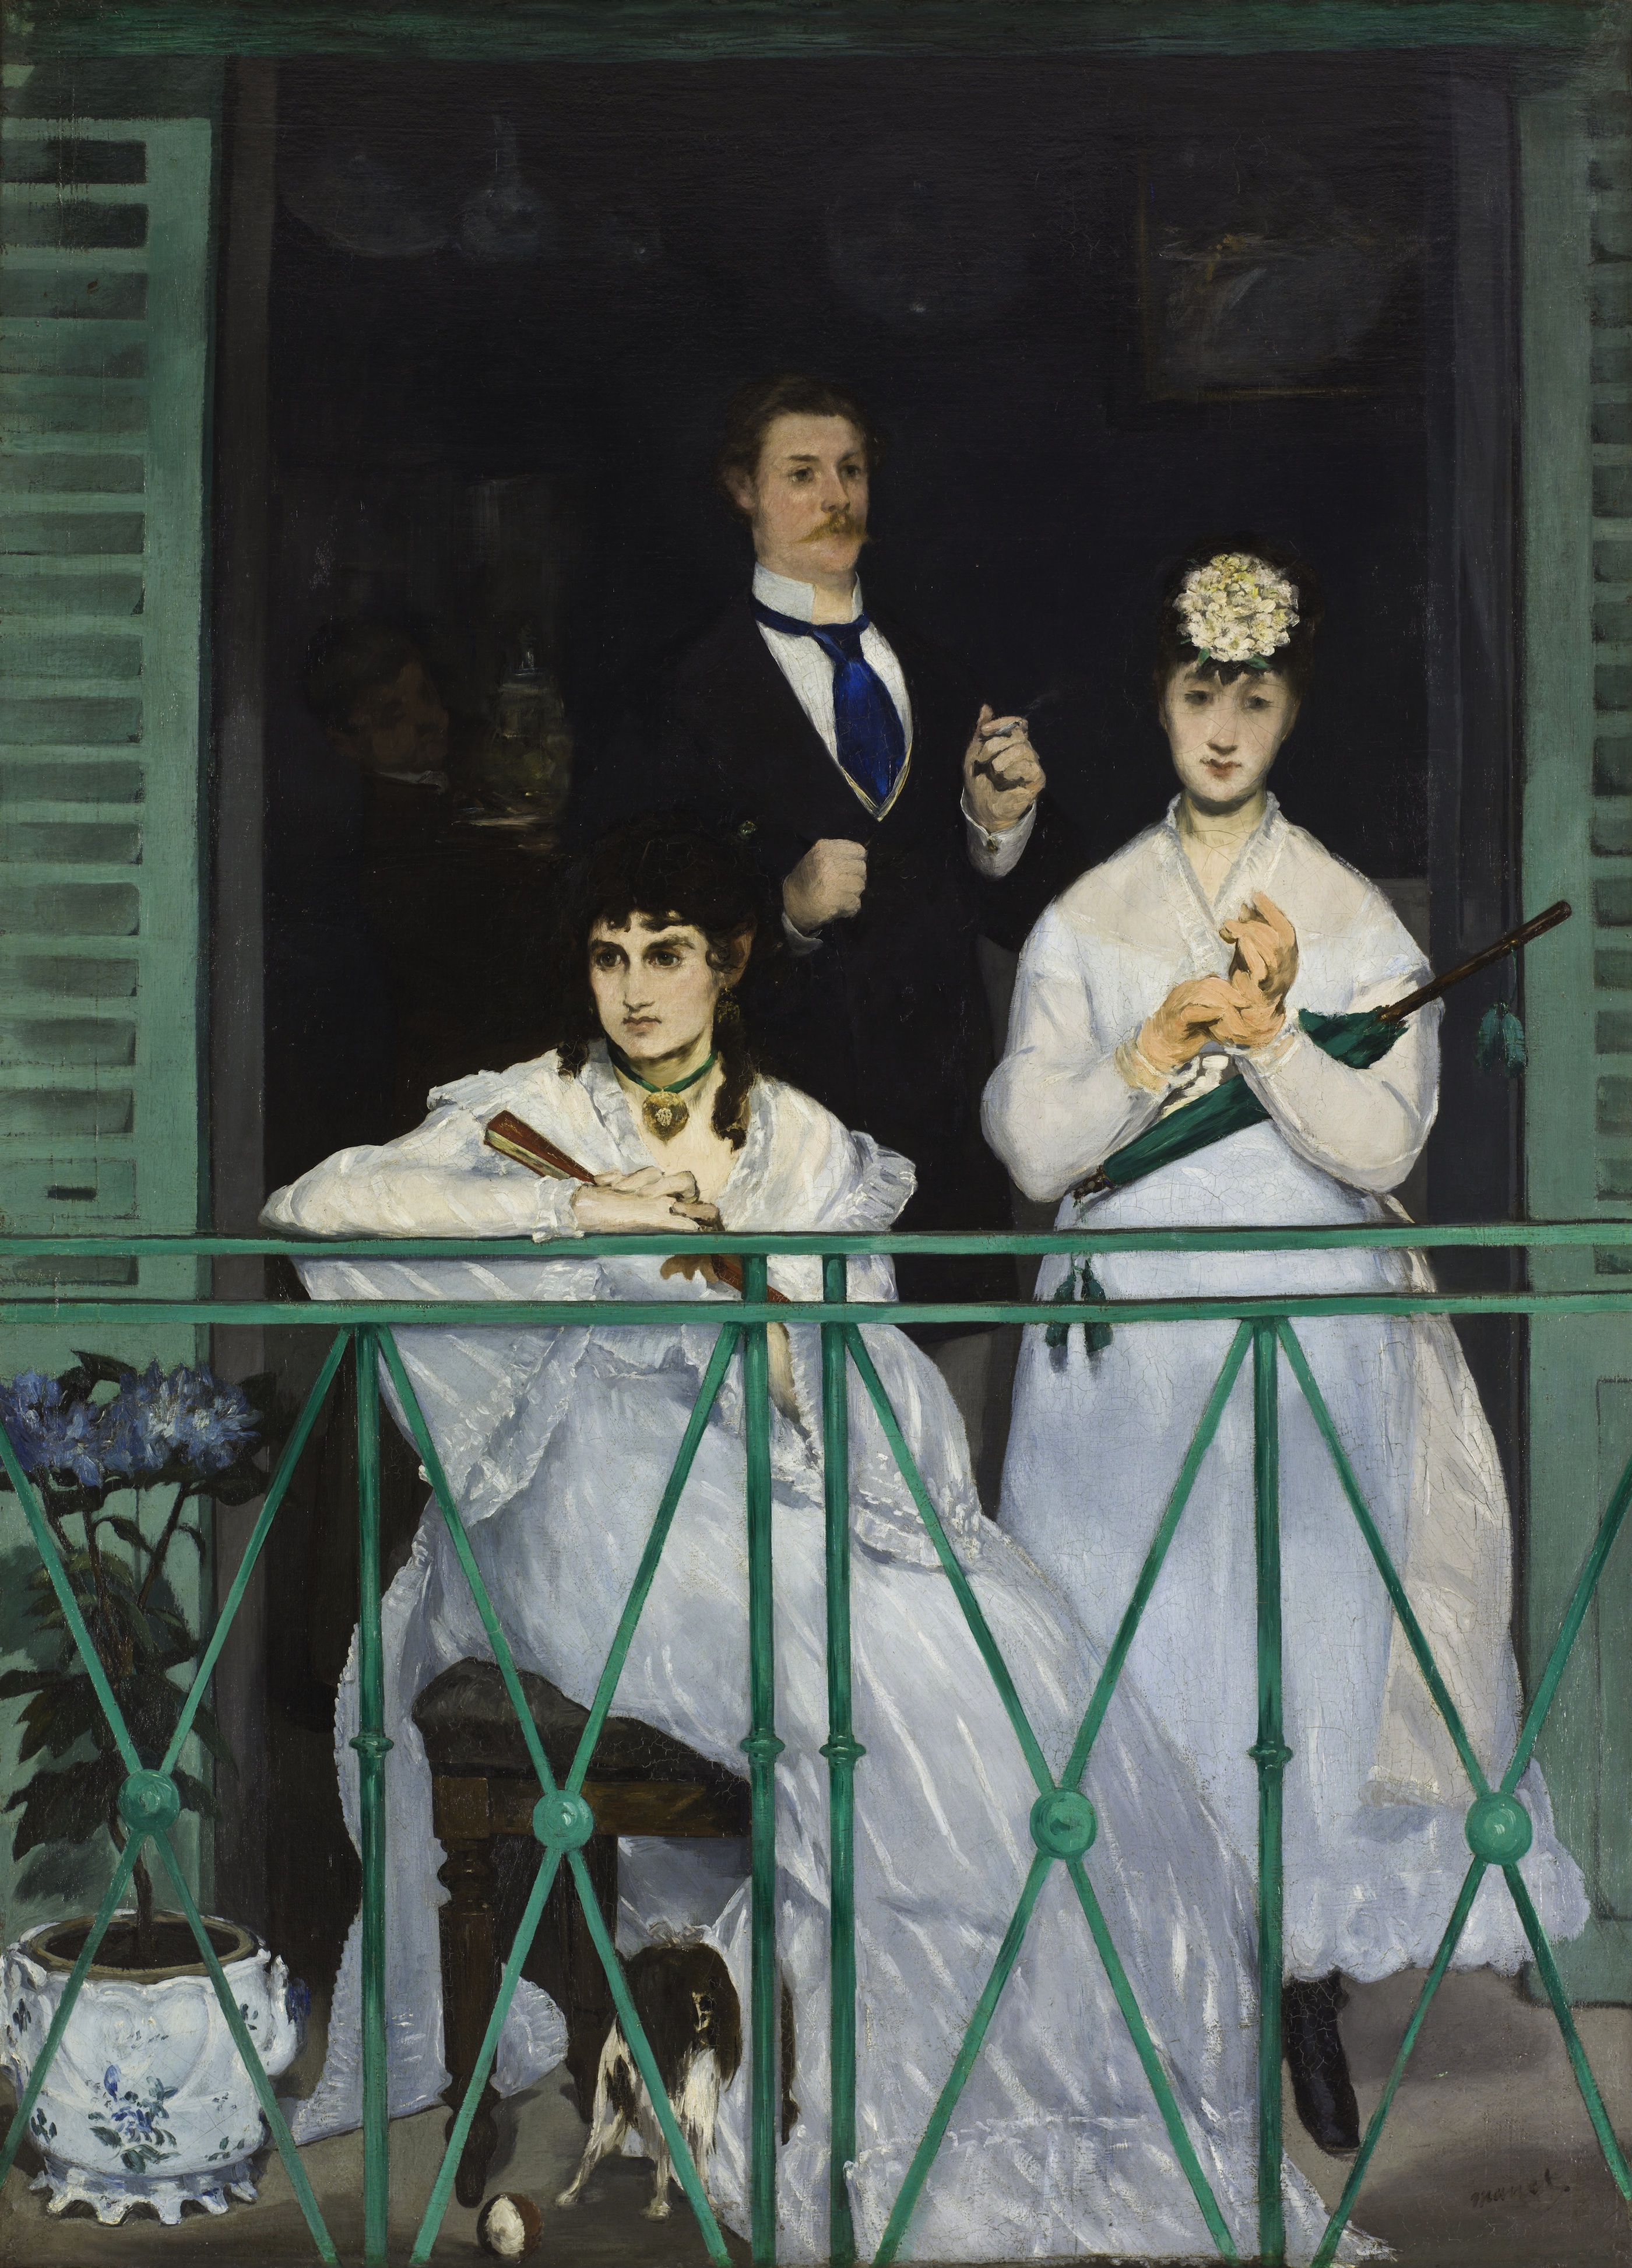 The Balcony by Édouard Manet - between 1868 and 1869 - 169 × 125 cm Musée d'Orsay